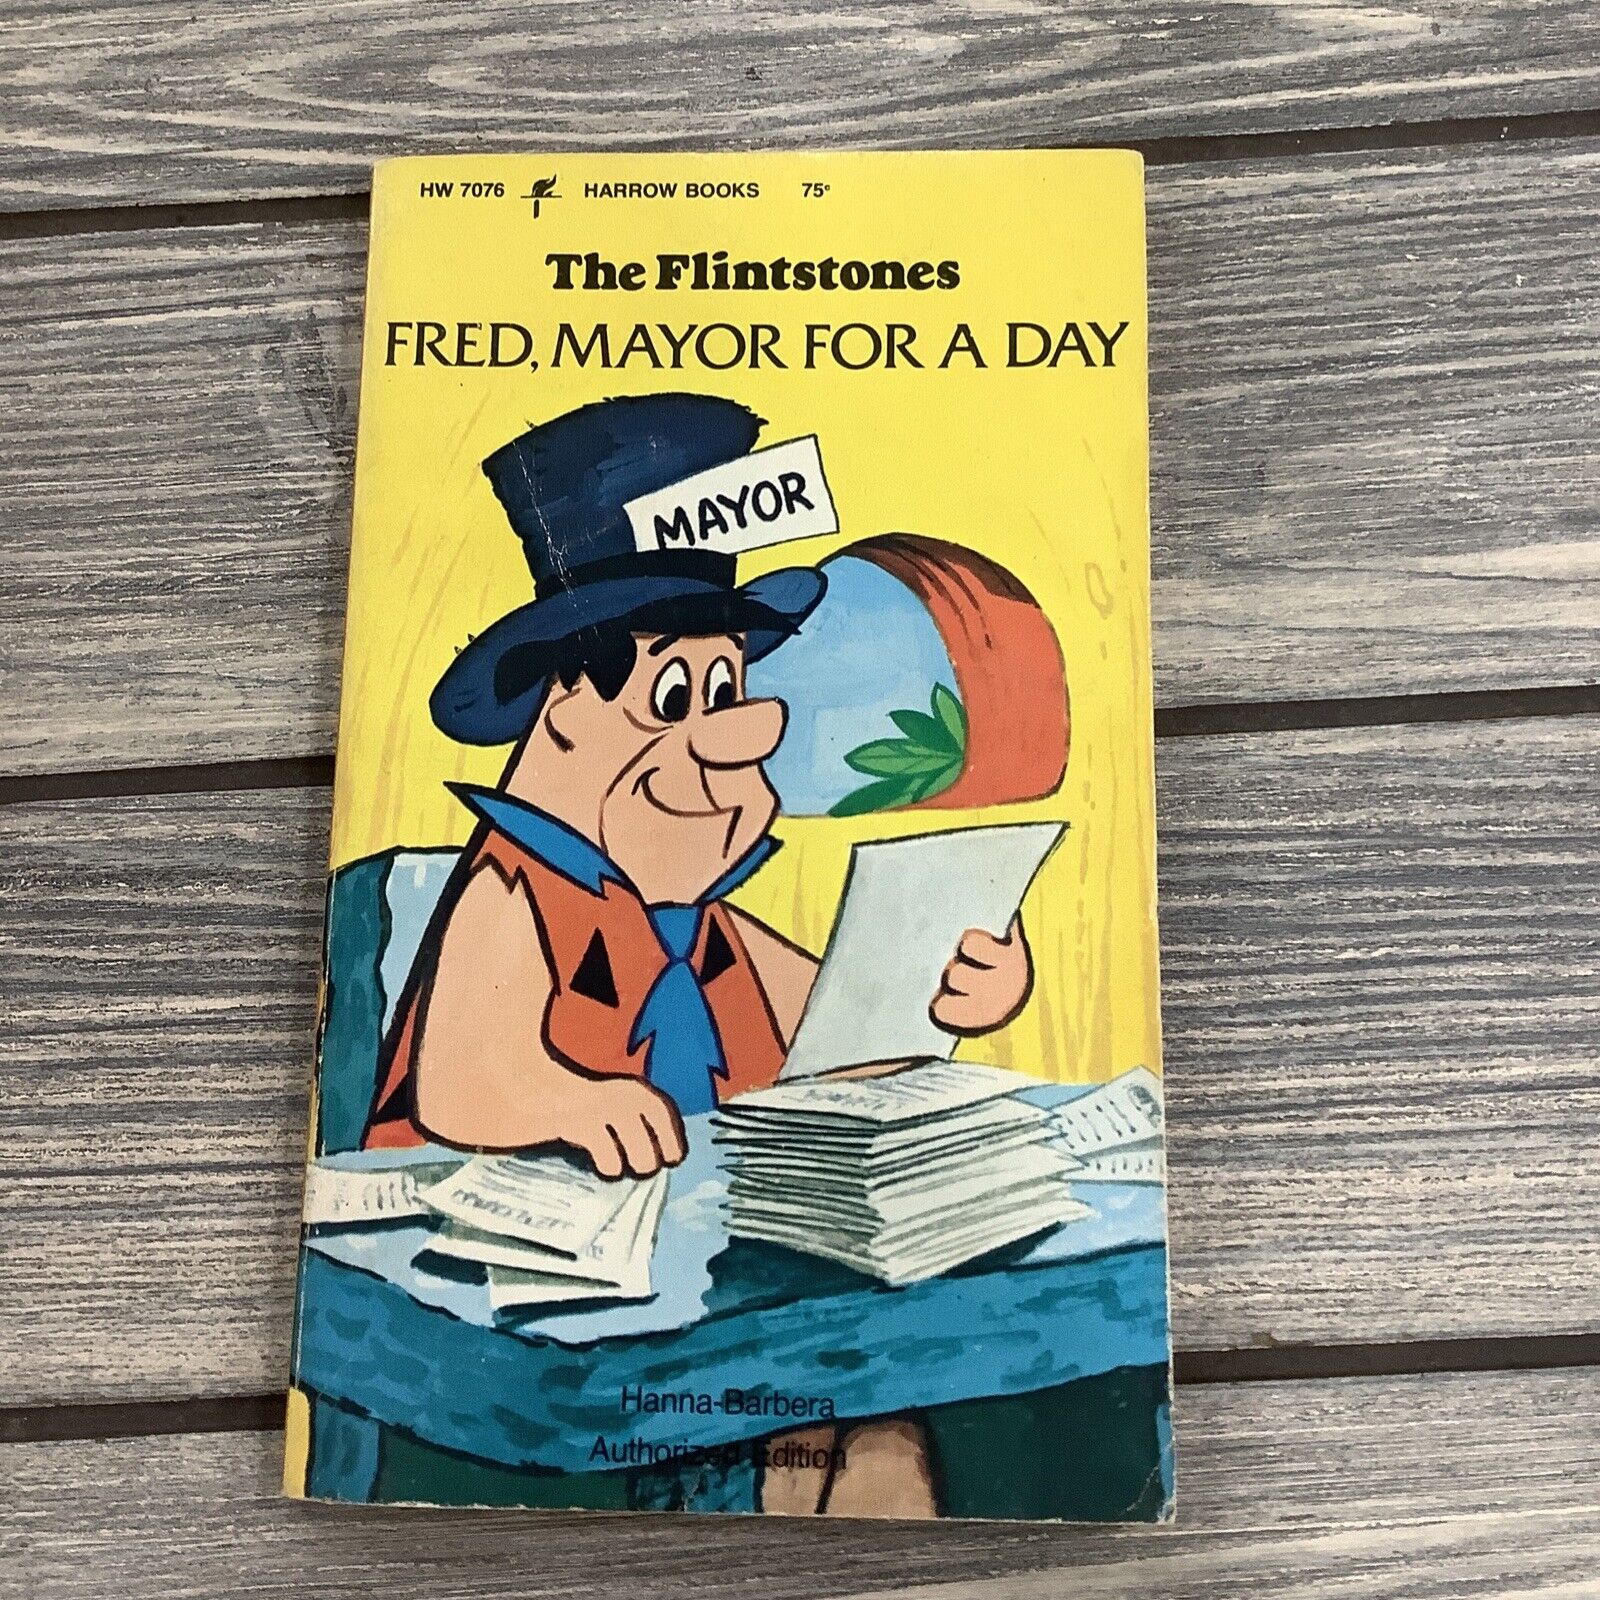 The Flintstones Fred, Mayor For a Day 1974 and barny beach Figure